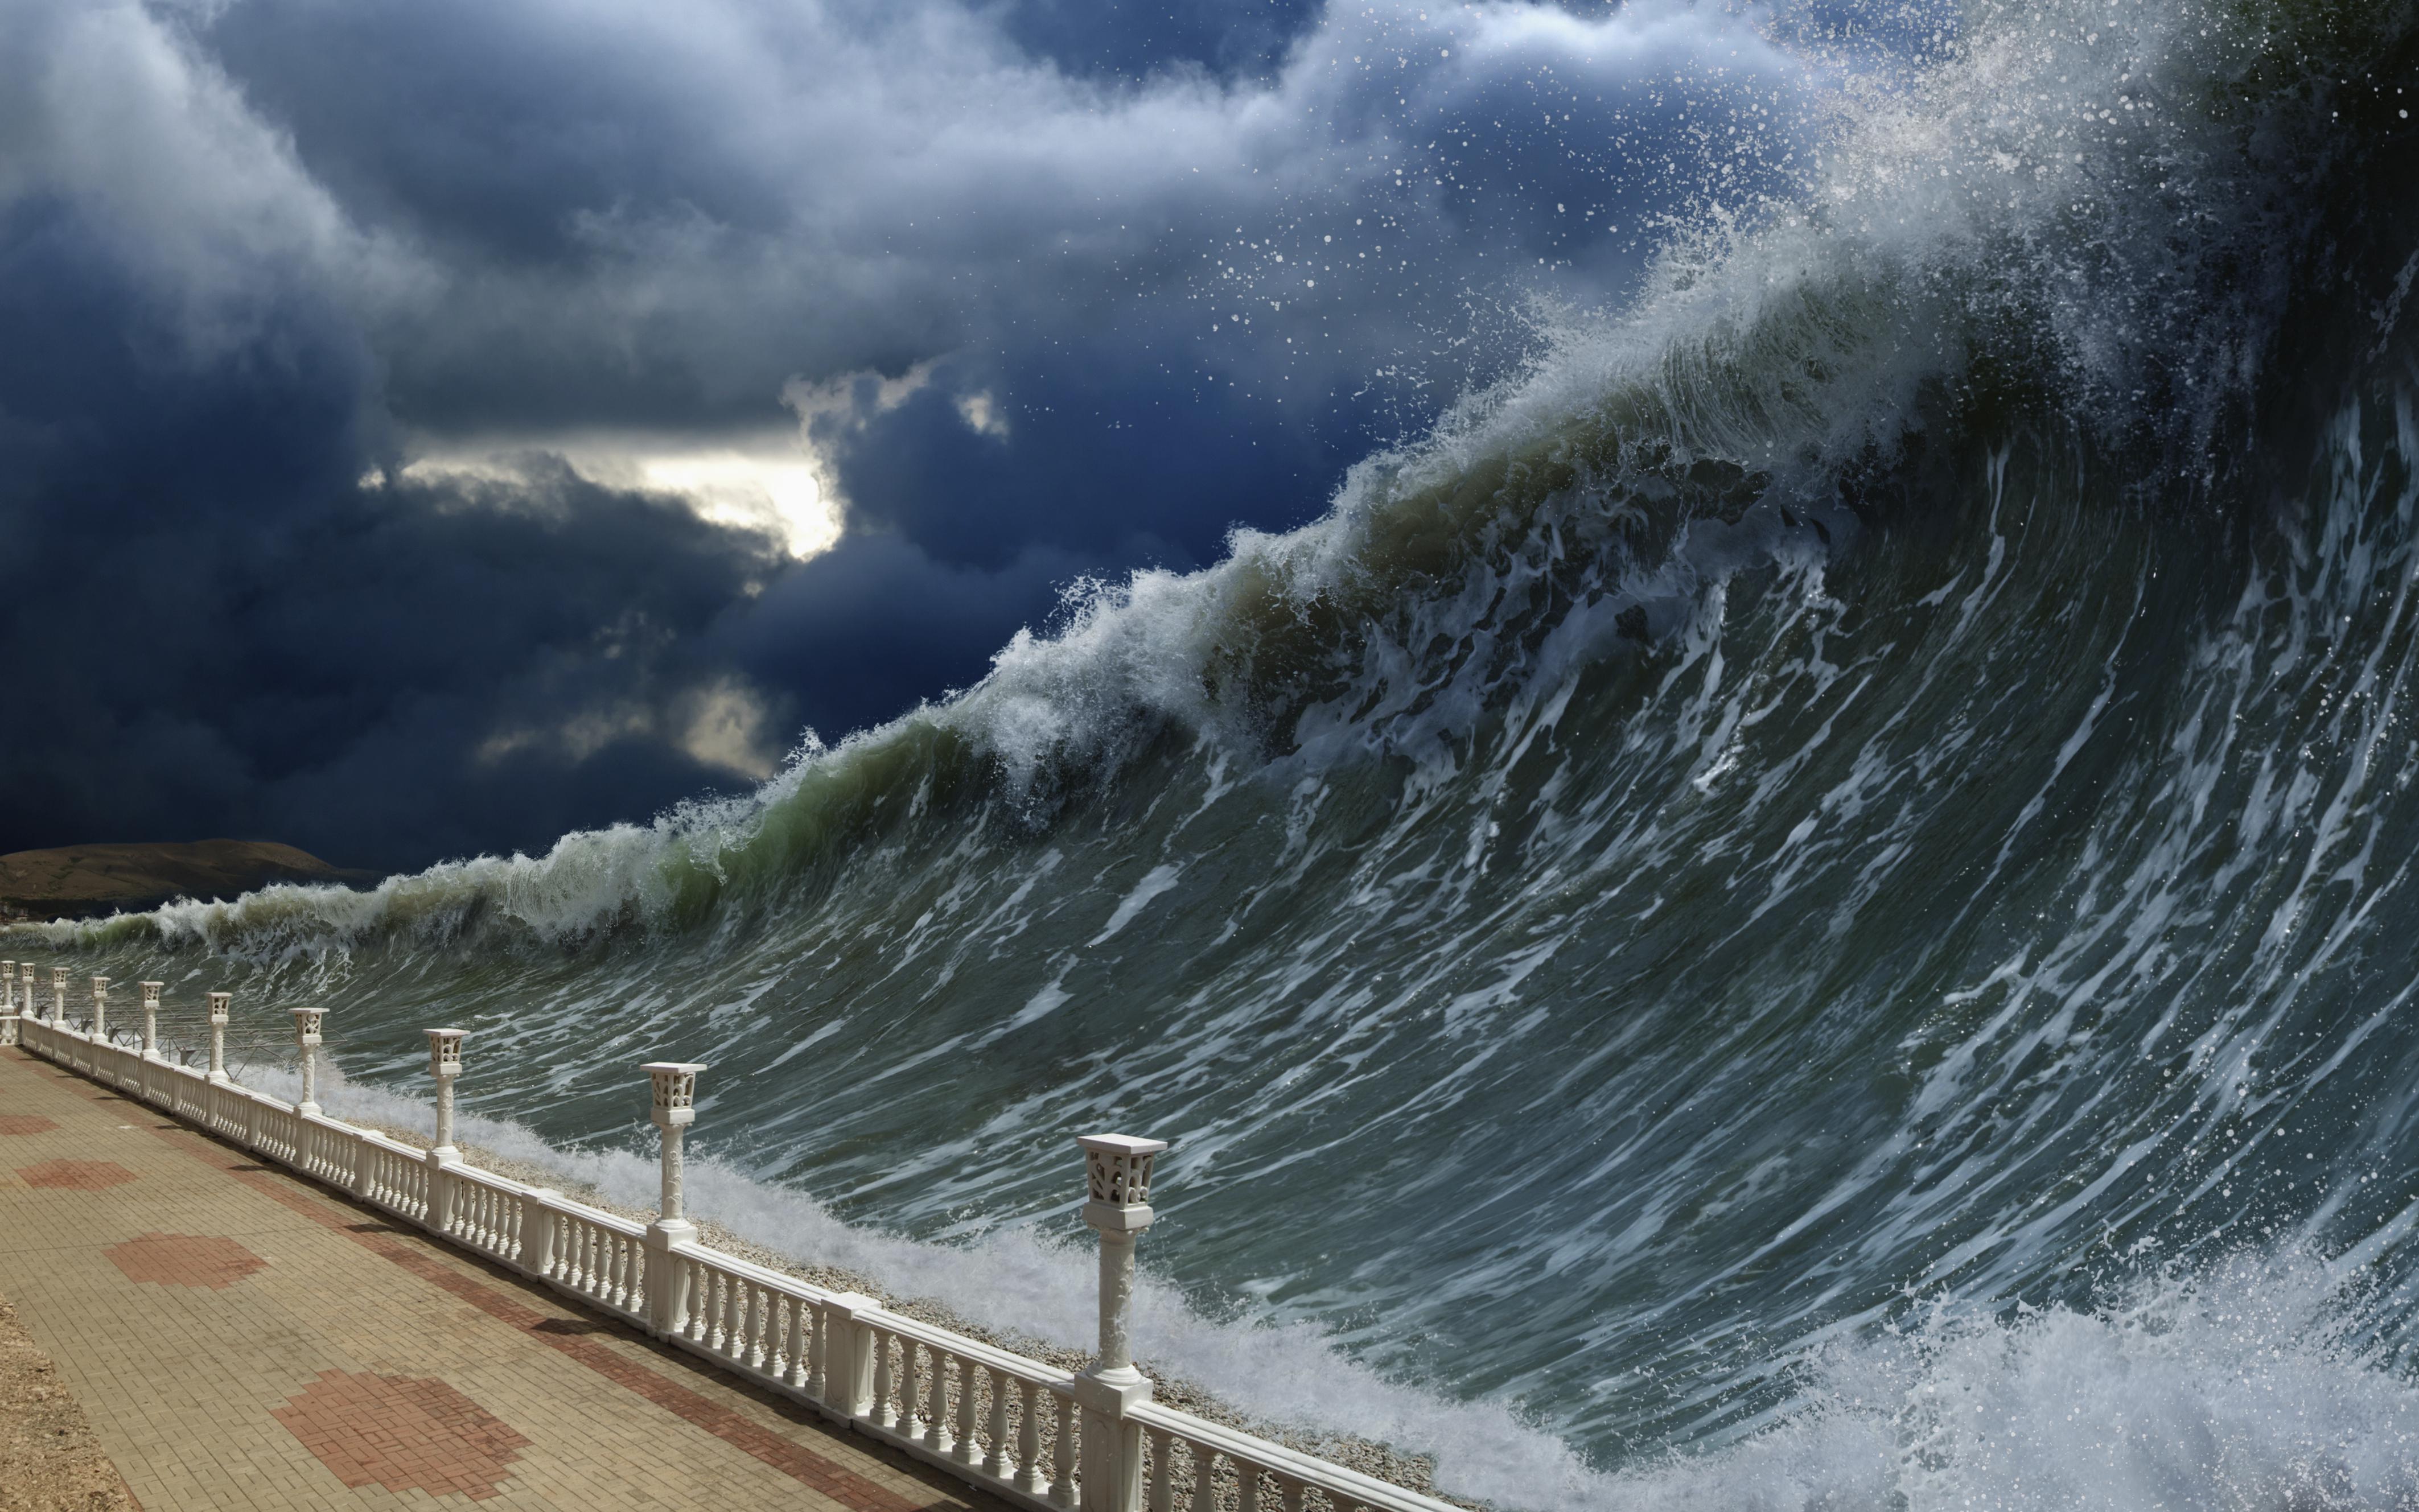  Spain will be wiped out by the waves, conspiracy theorists claim